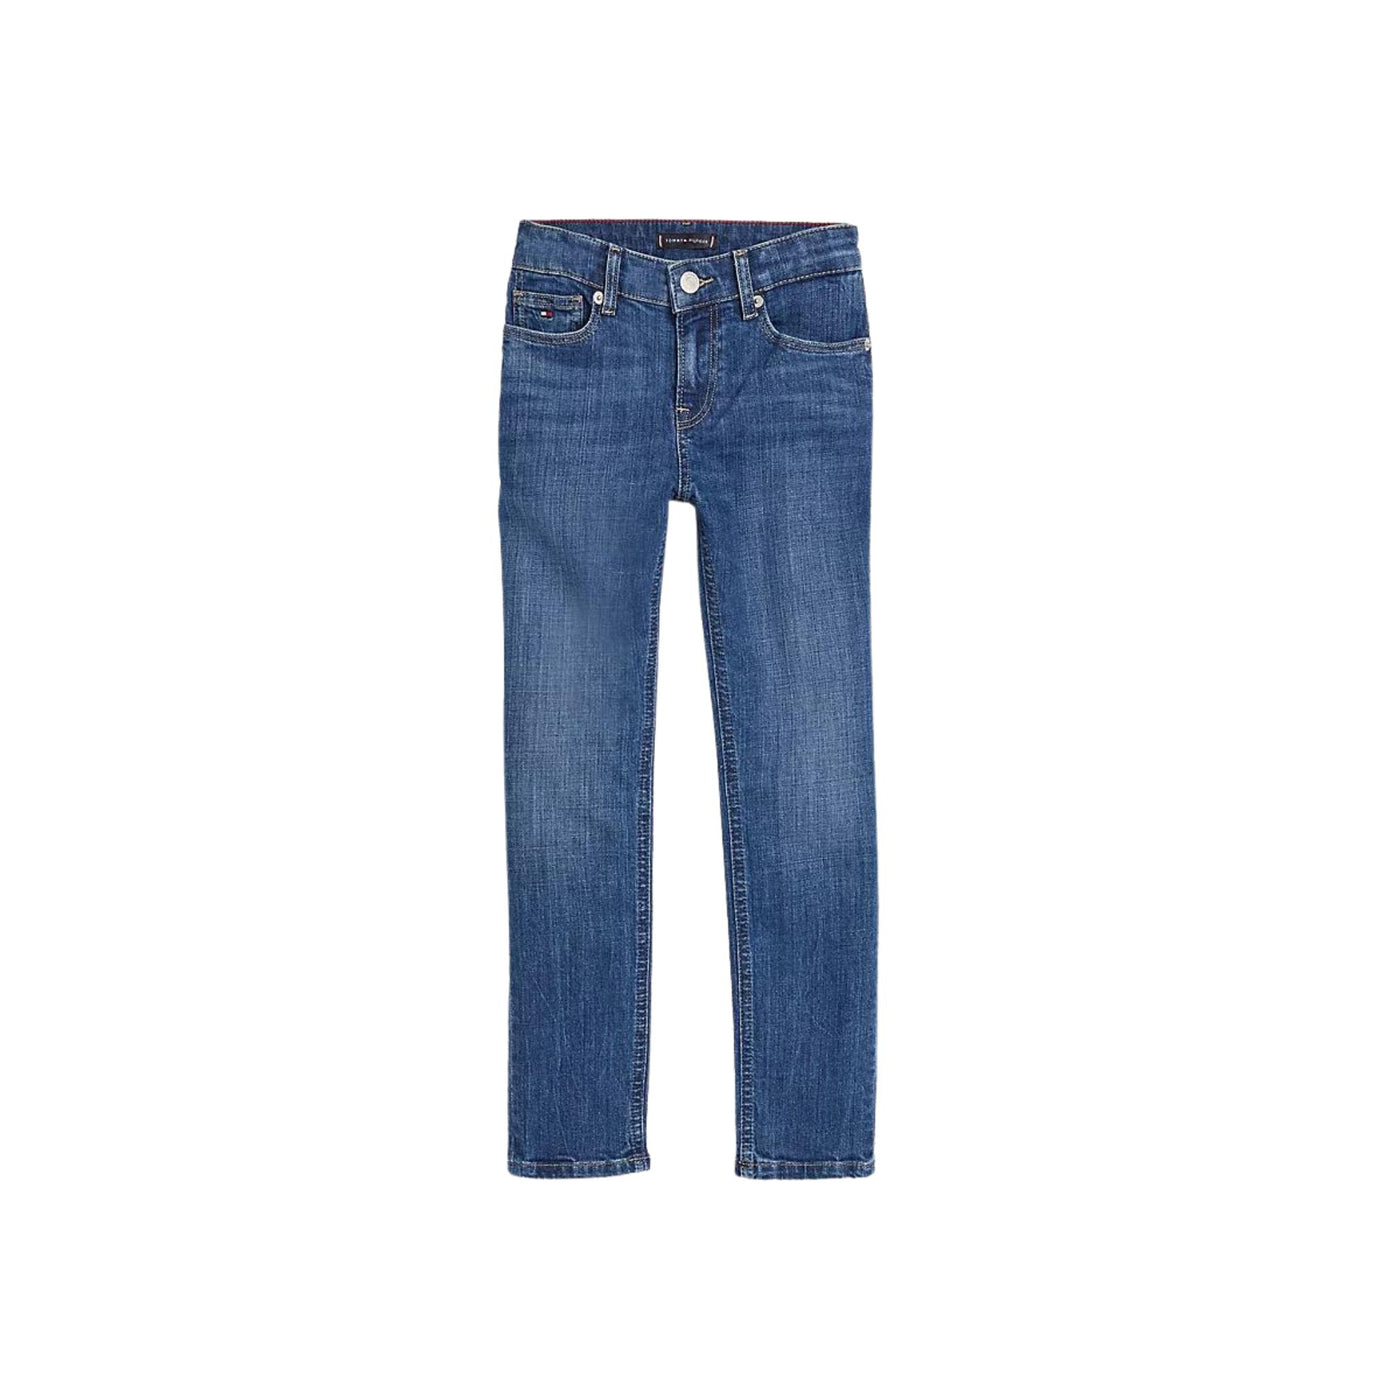 Jeans Bambino slim fit sbiadito